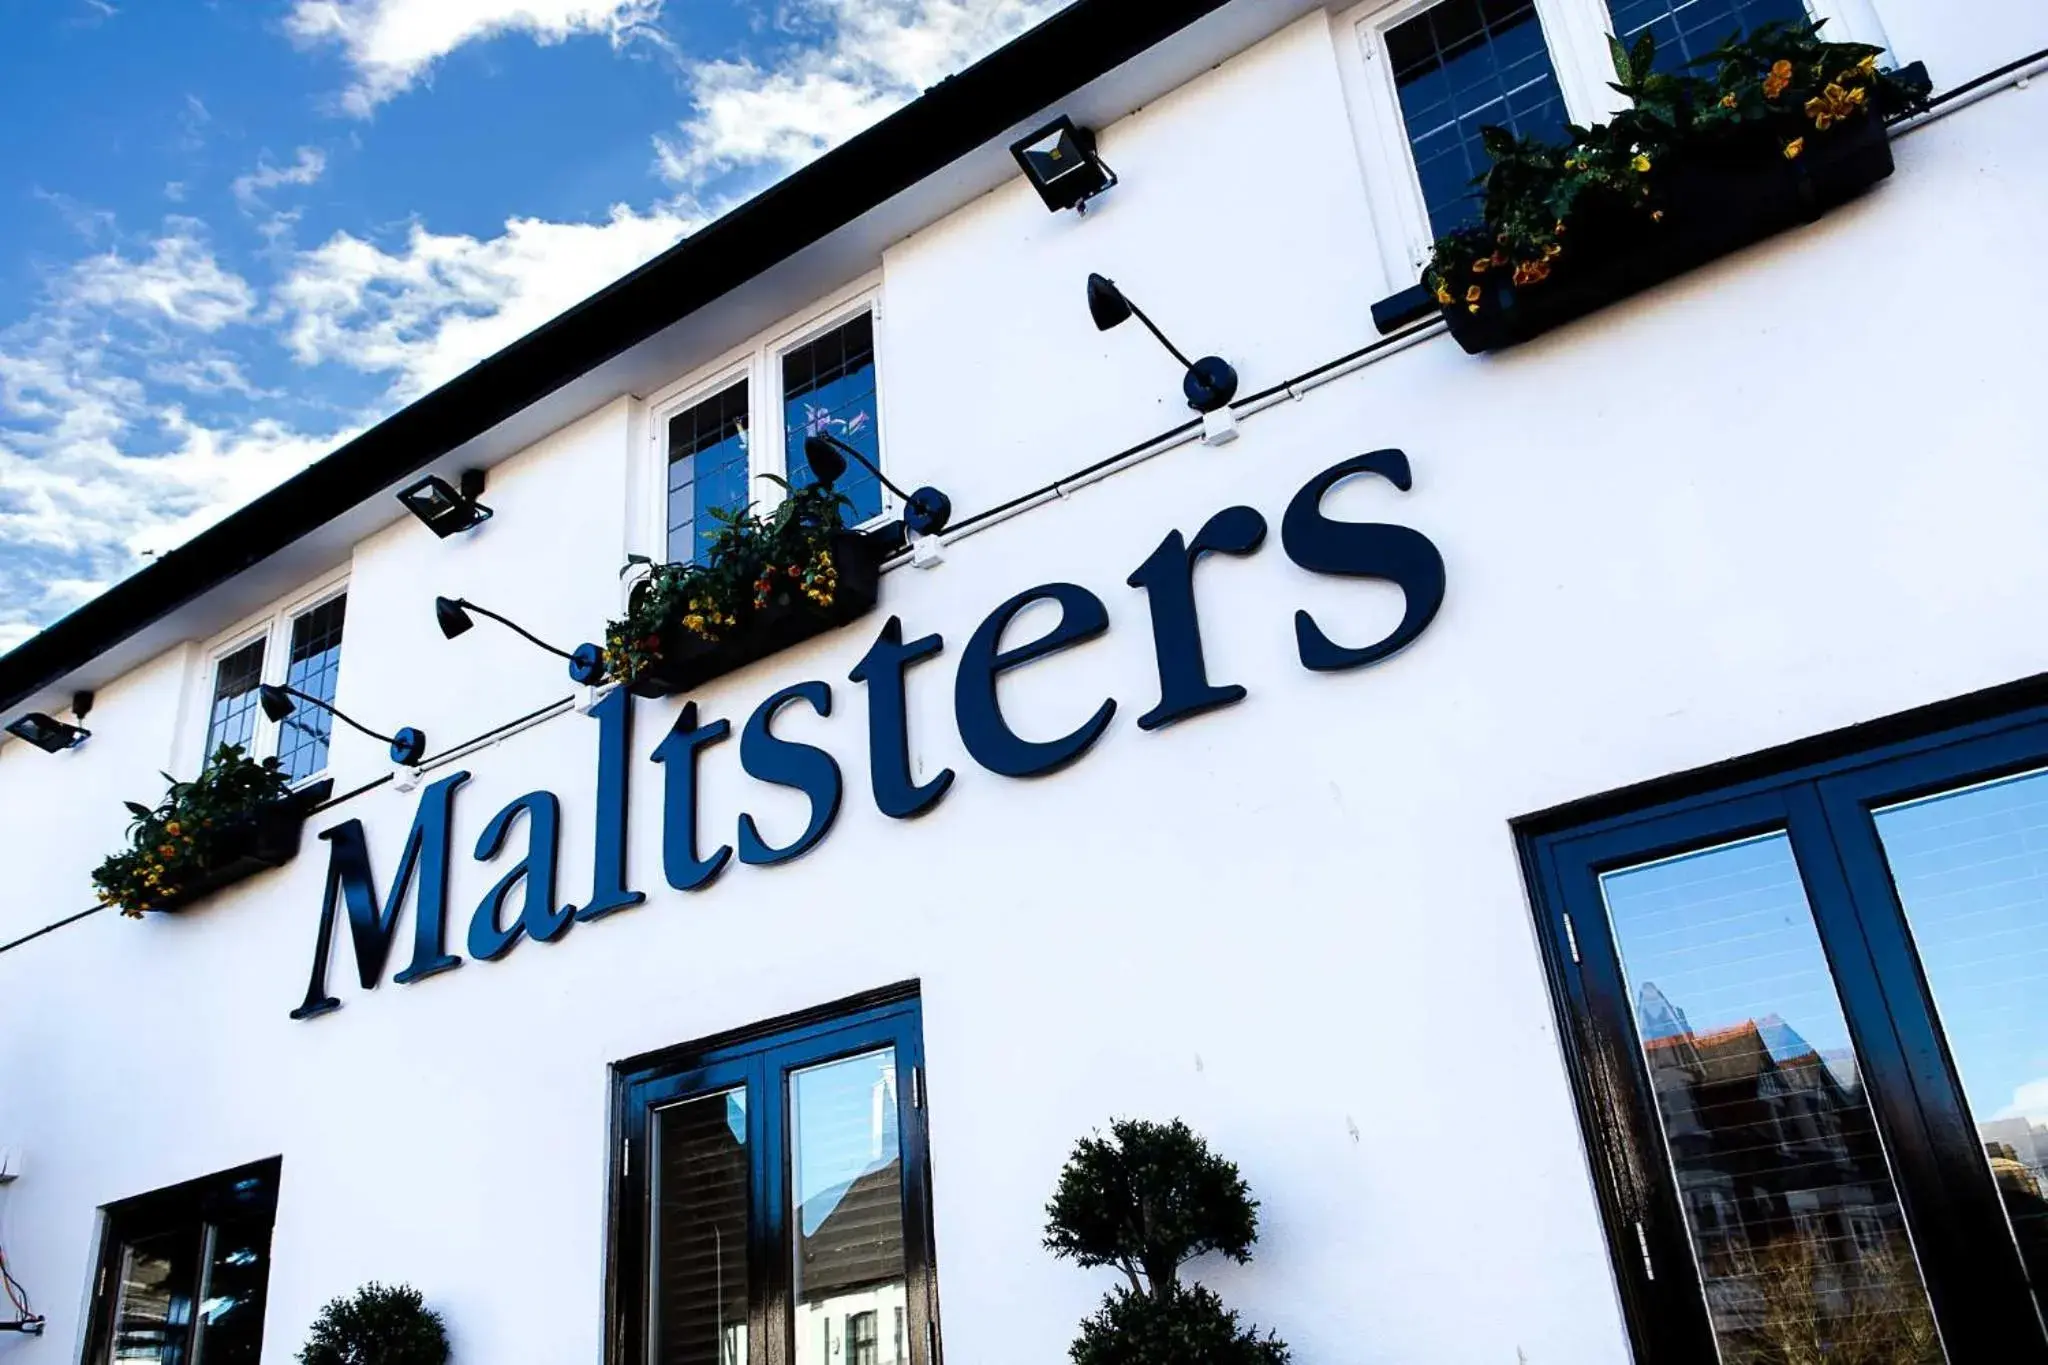 Property logo or sign in Maltsters